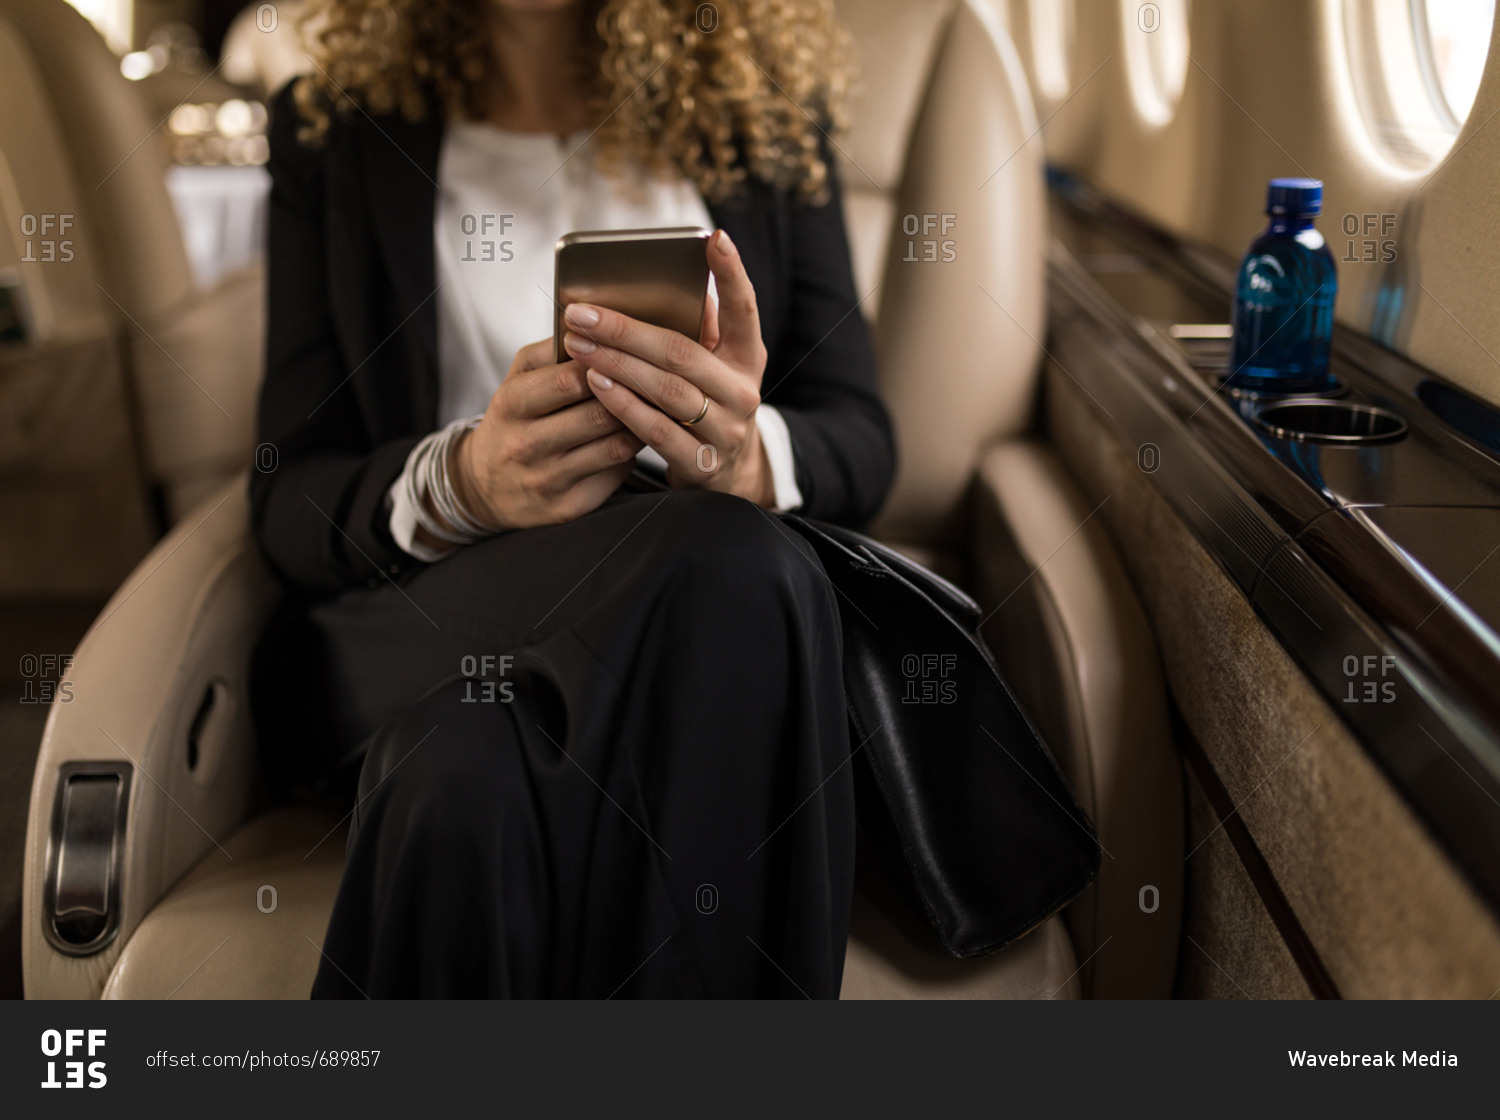 Mid section of businesswoman using mobile phone in private jet